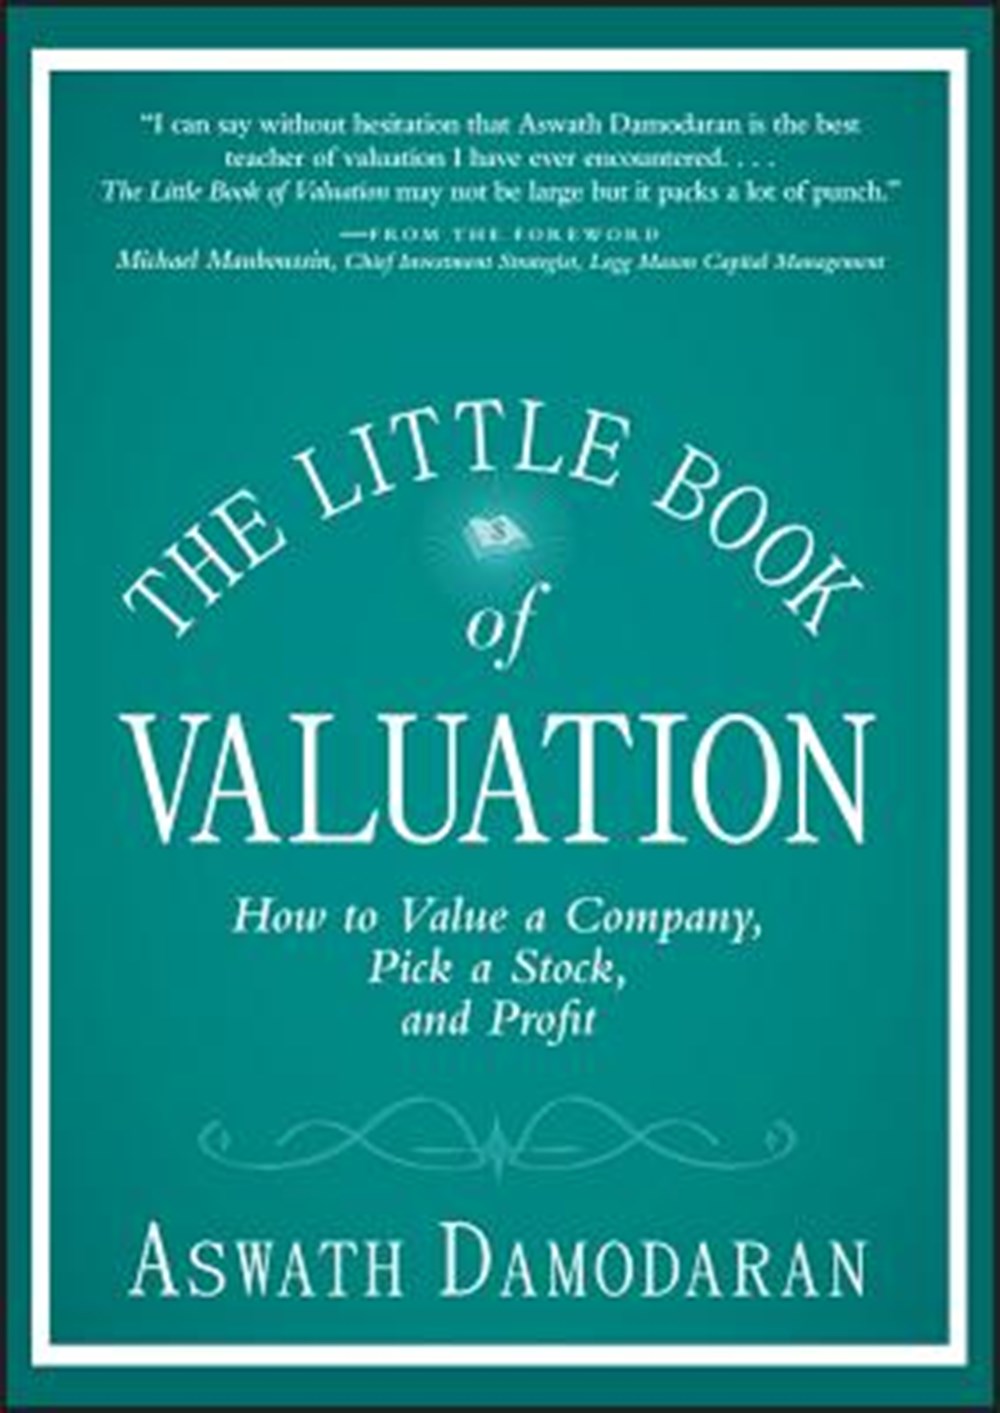 Little Book of Valuation How to Value a Company, Pick a Stock, and Profit